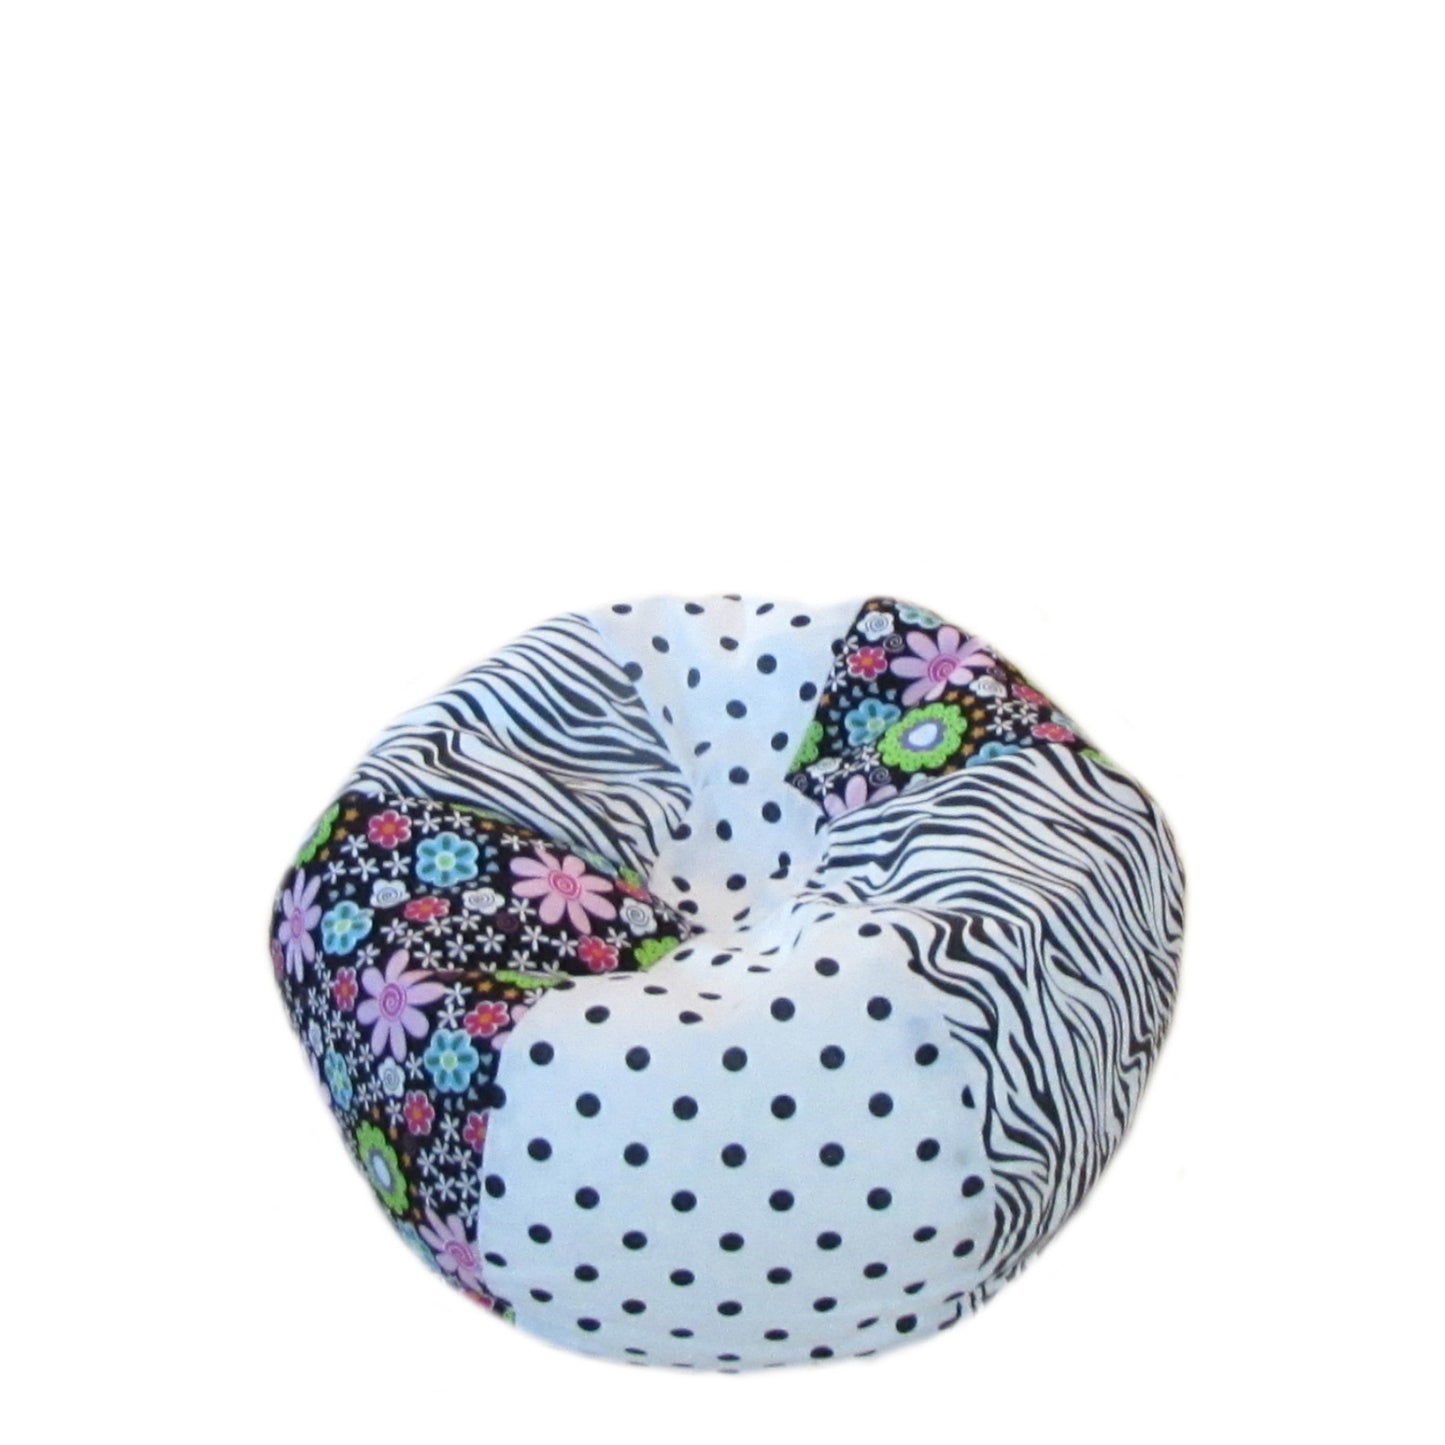 Zebra Print Dots Floral Doll Bean Bag Chair for 18-inch dolls without doll